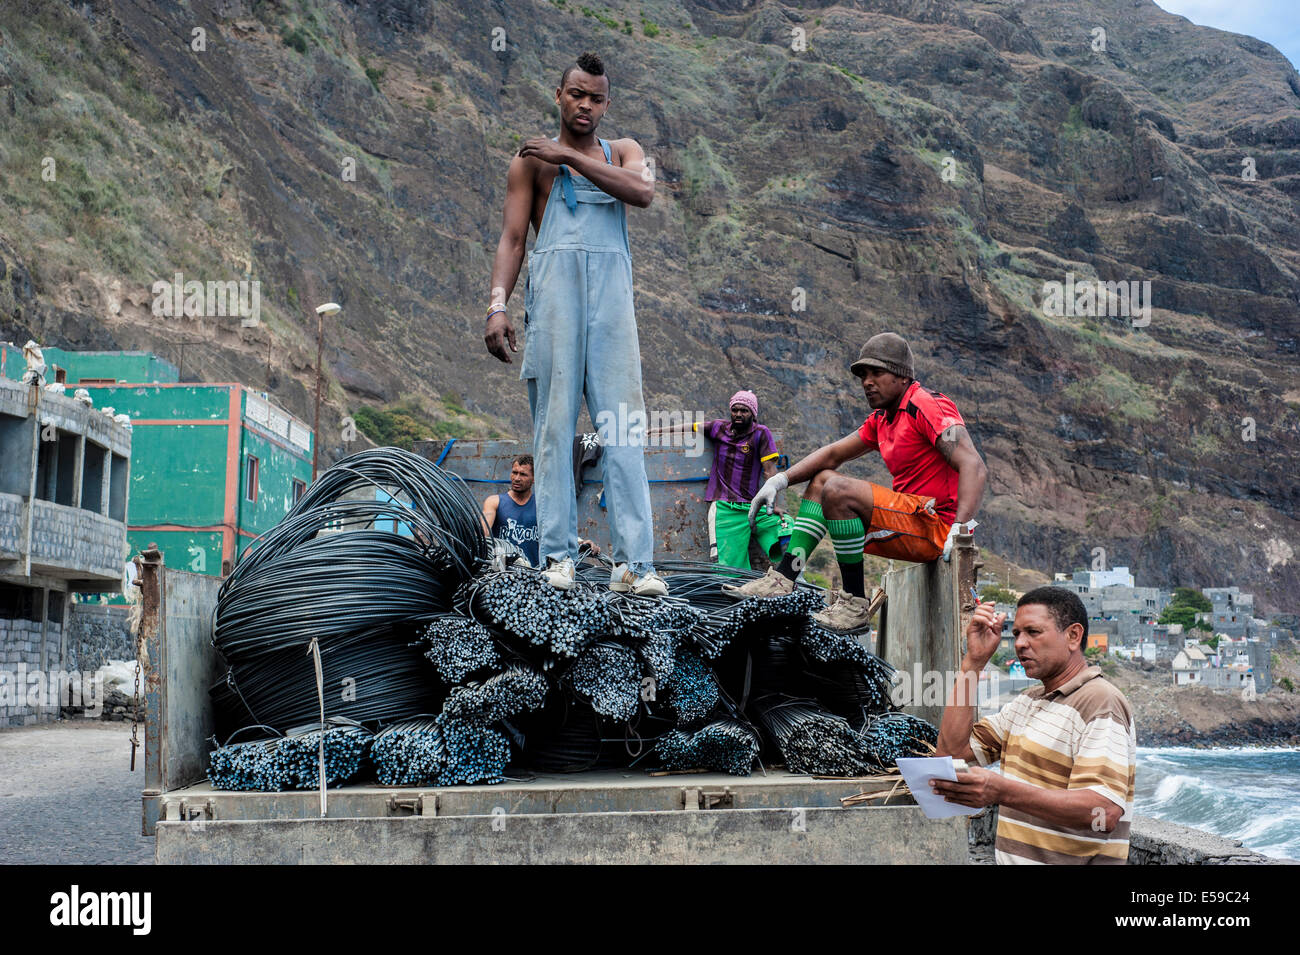 Workers unloading a heavy truck in village called Paul on Santo Antao Island, Cape Verde Stock Photo